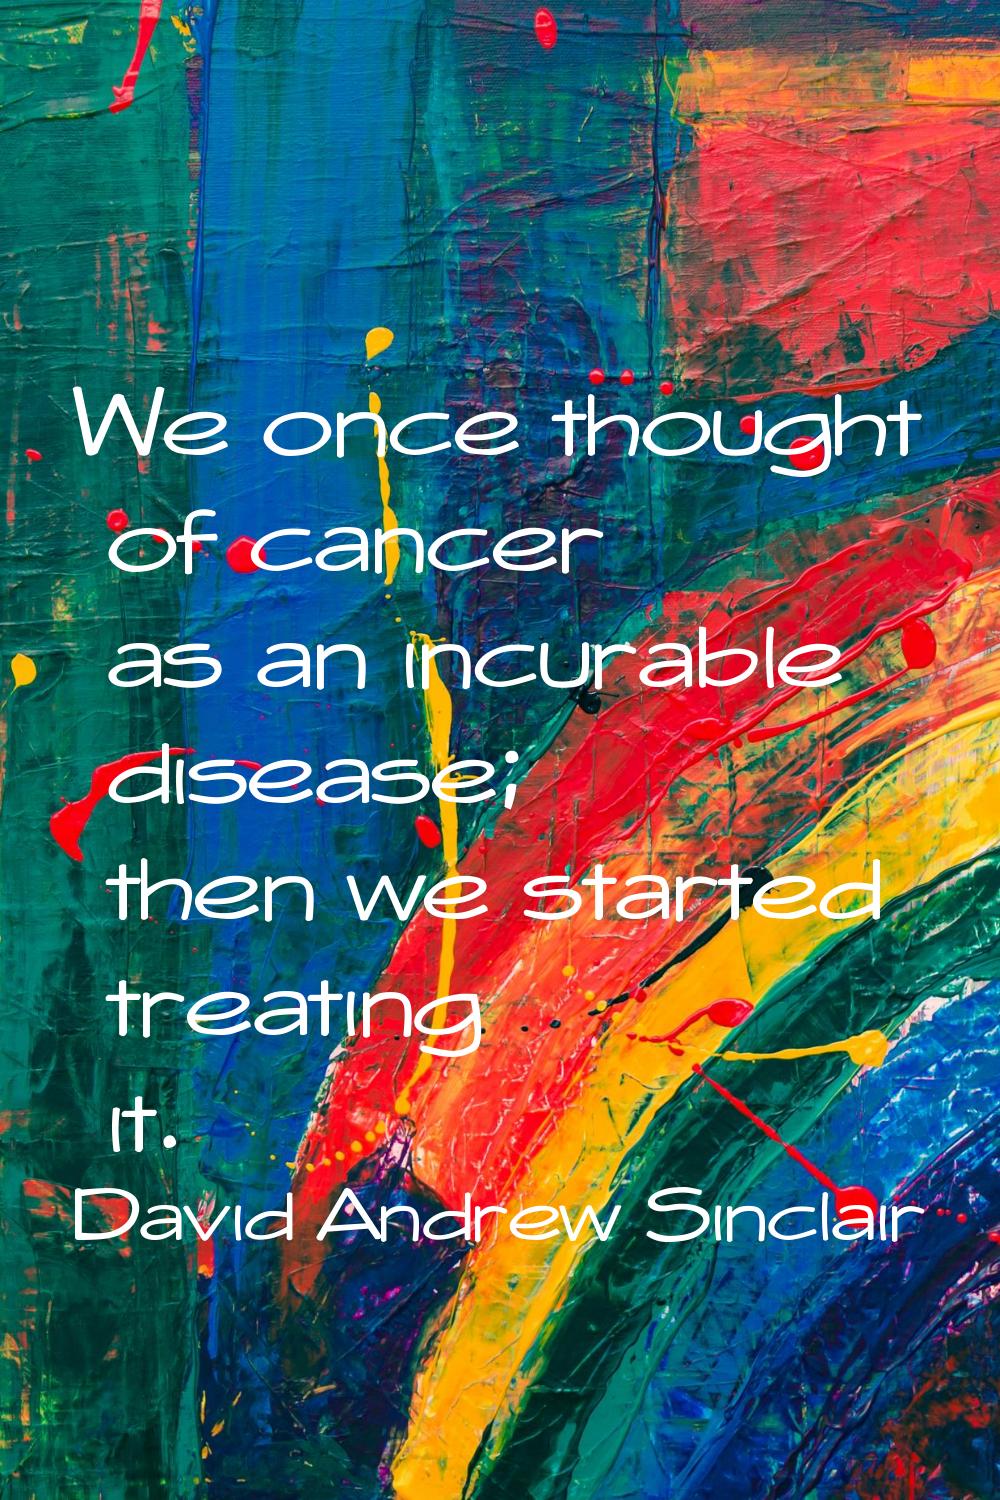 We once thought of cancer as an incurable disease; then we started treating it.